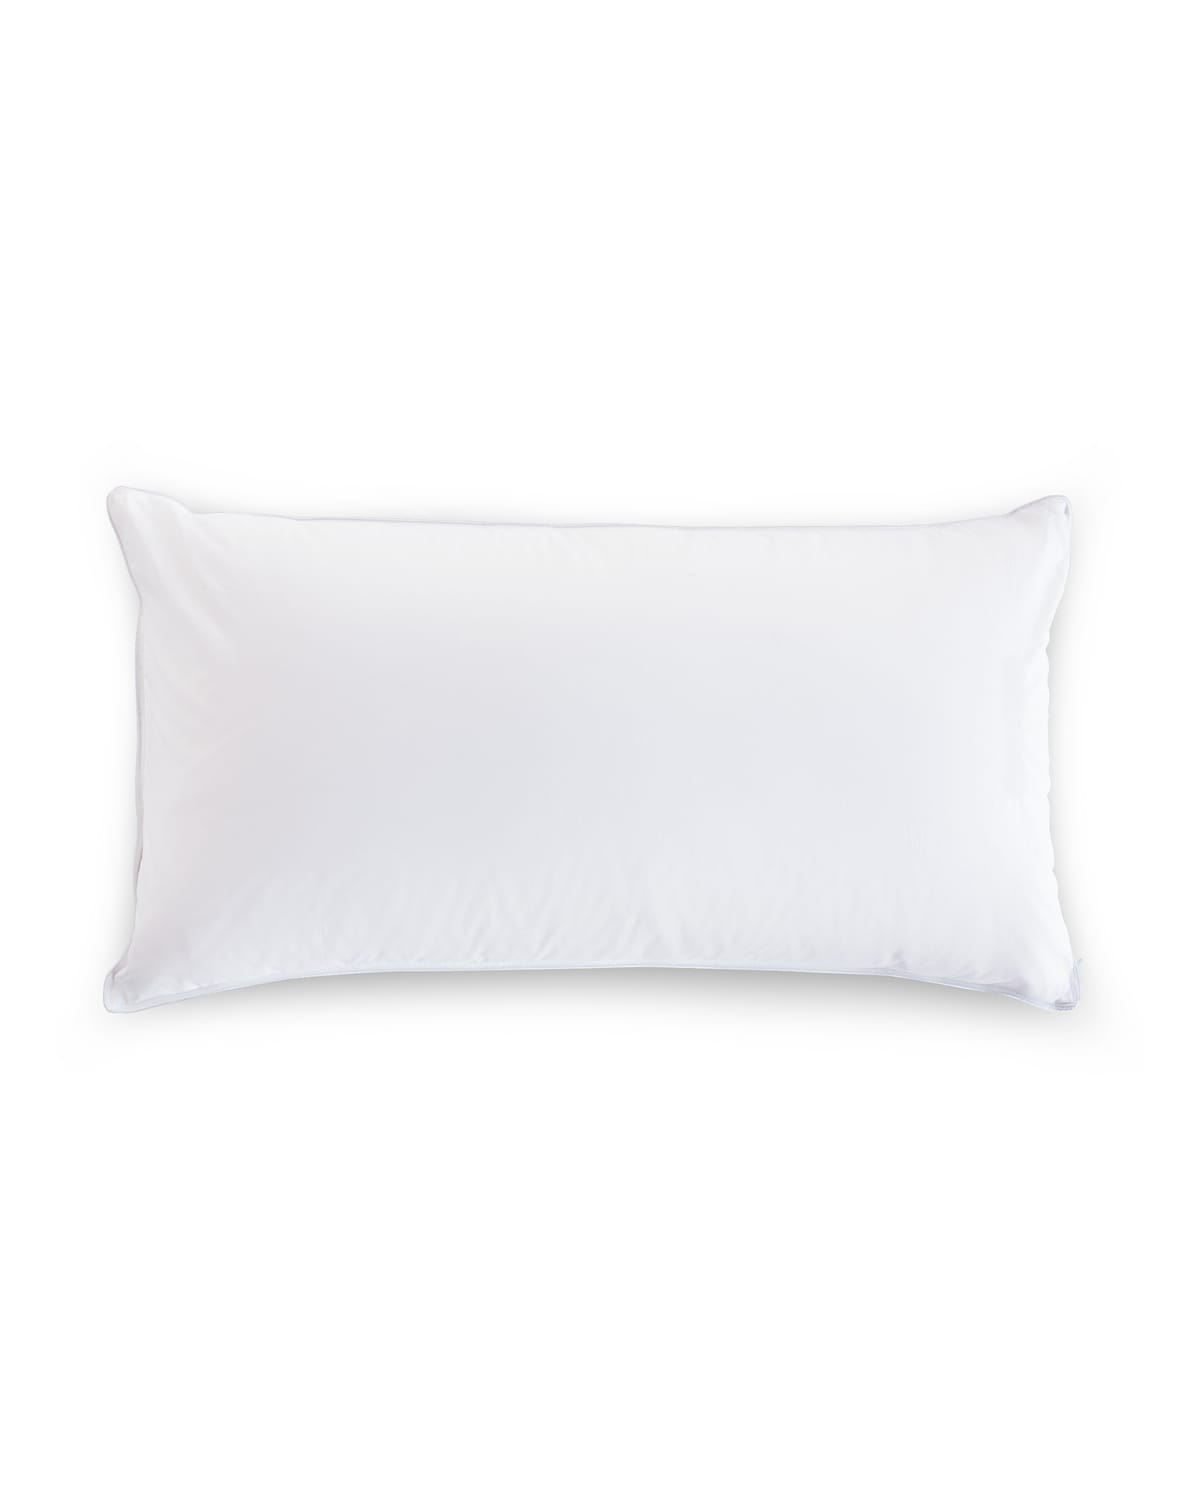 The Pillow Bar King Down Pillow, 20" X 36", Side Sleeper In White